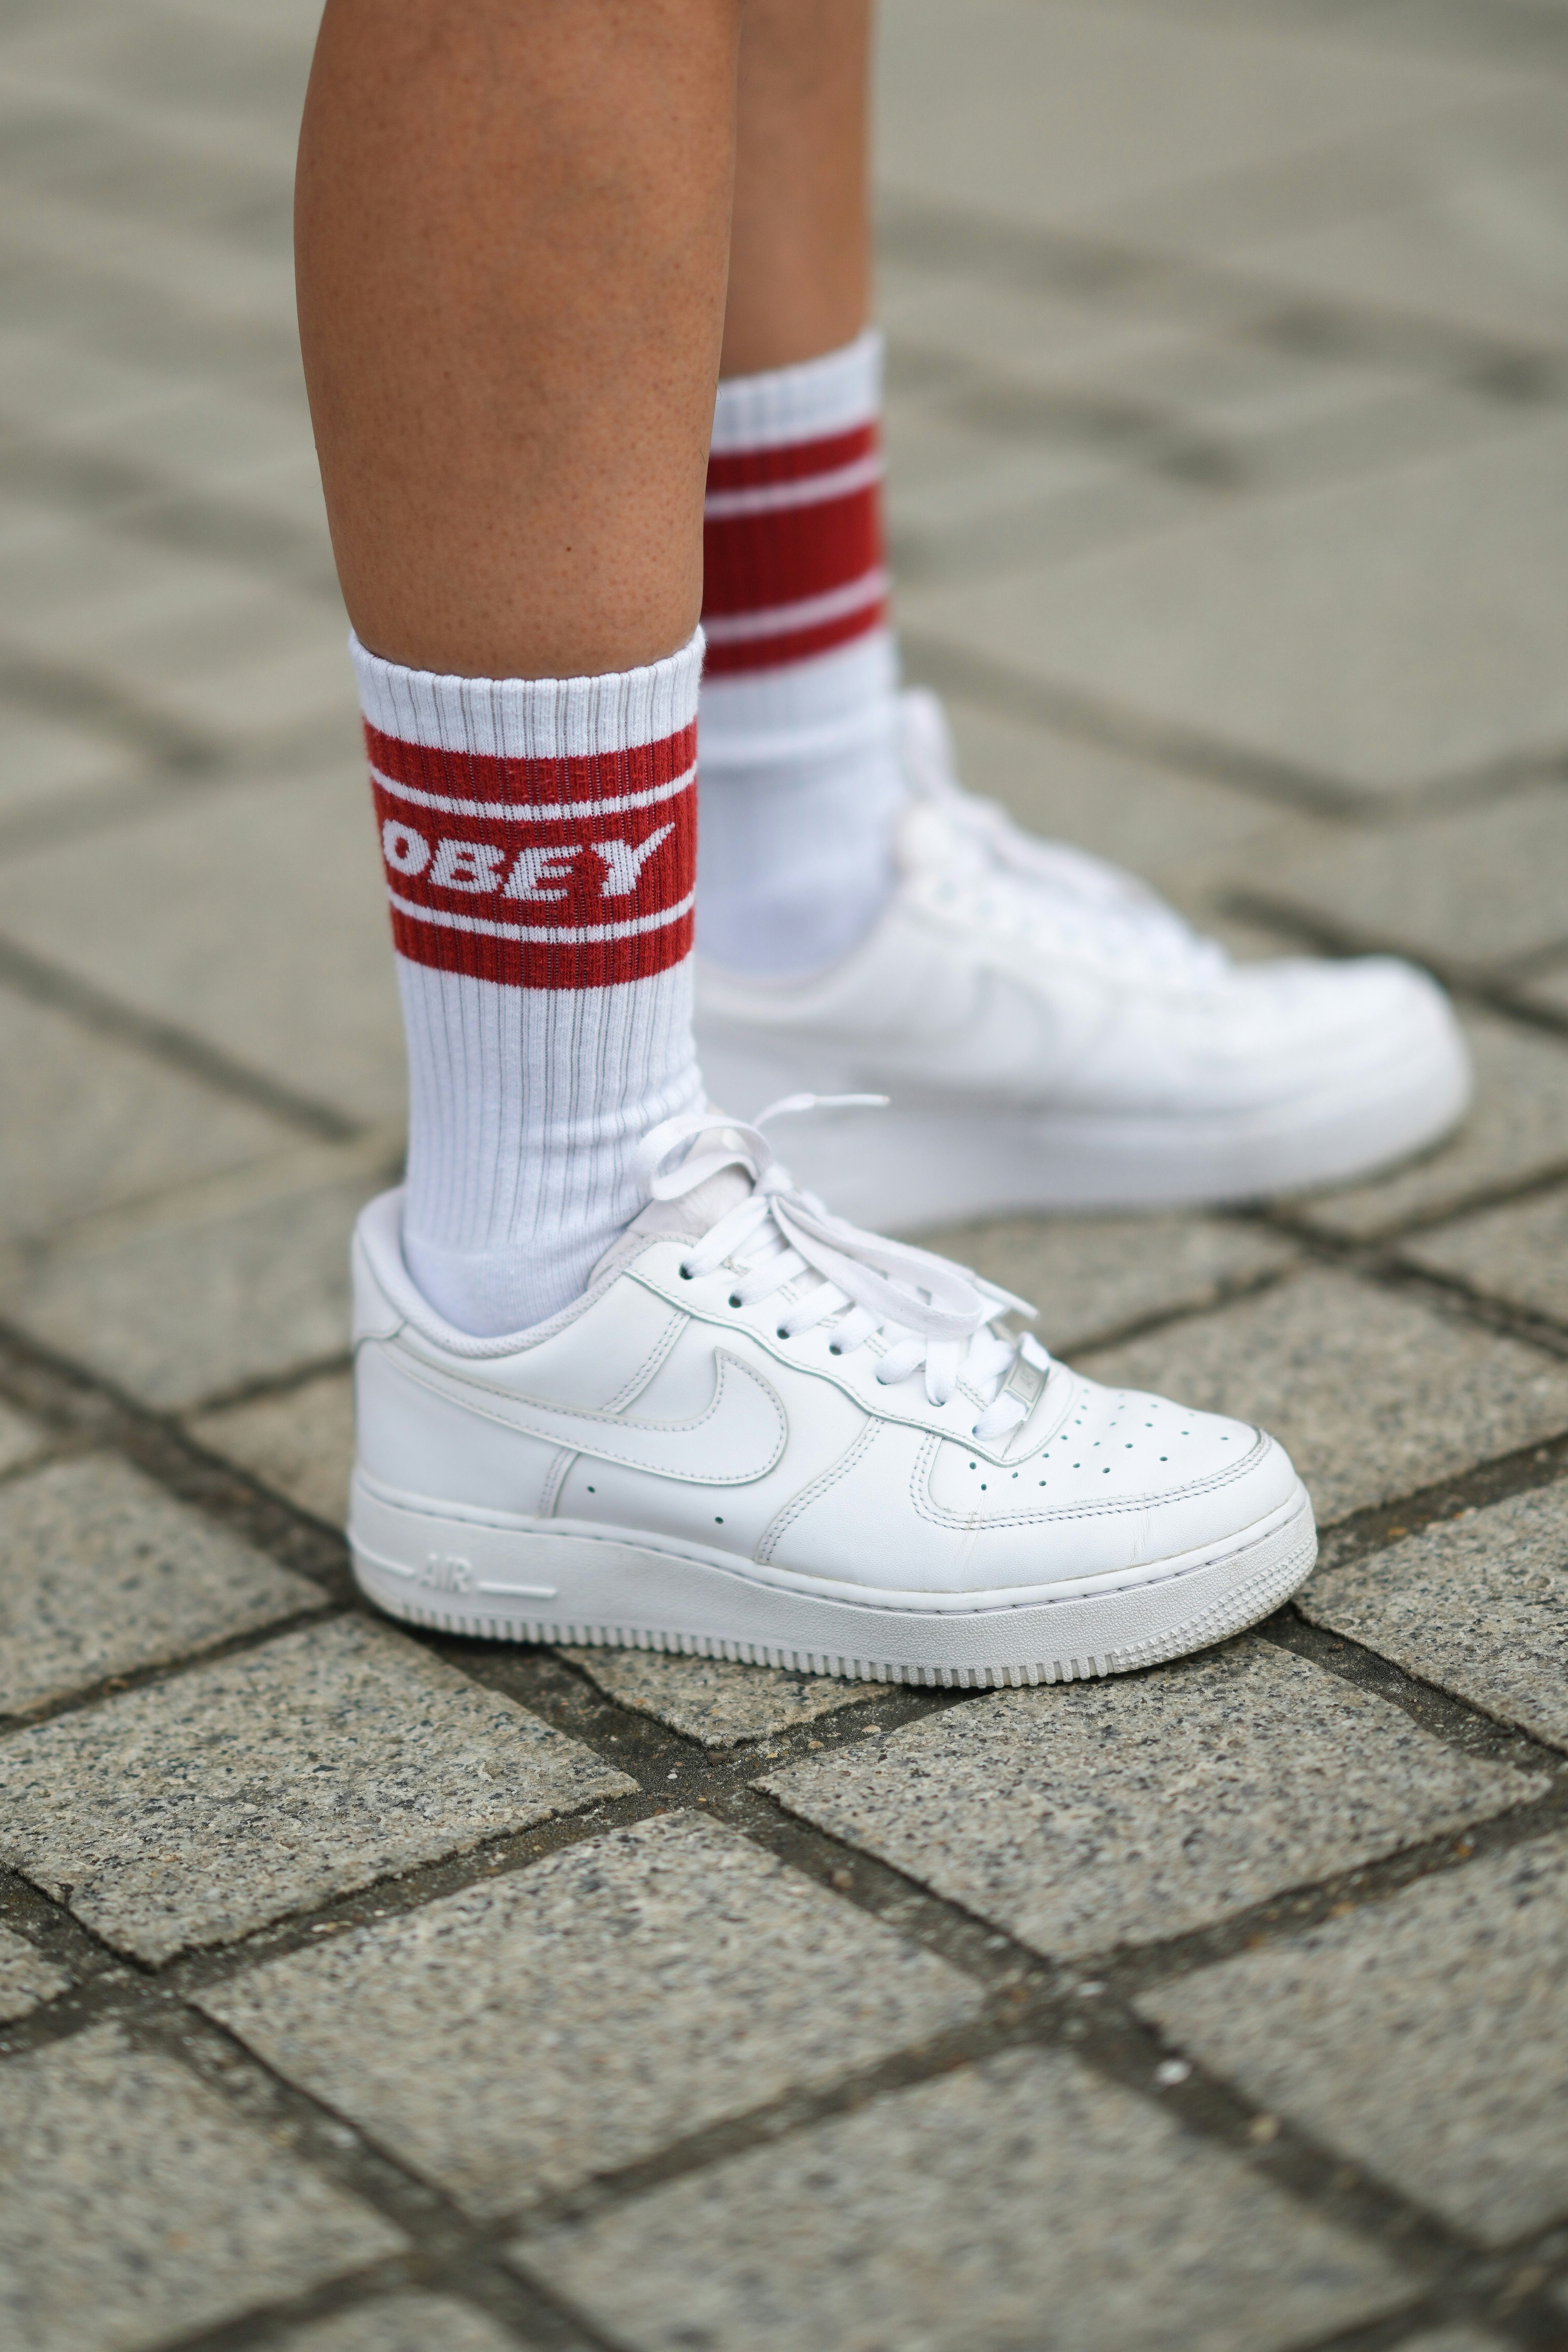 what socks do you wear with air force 1